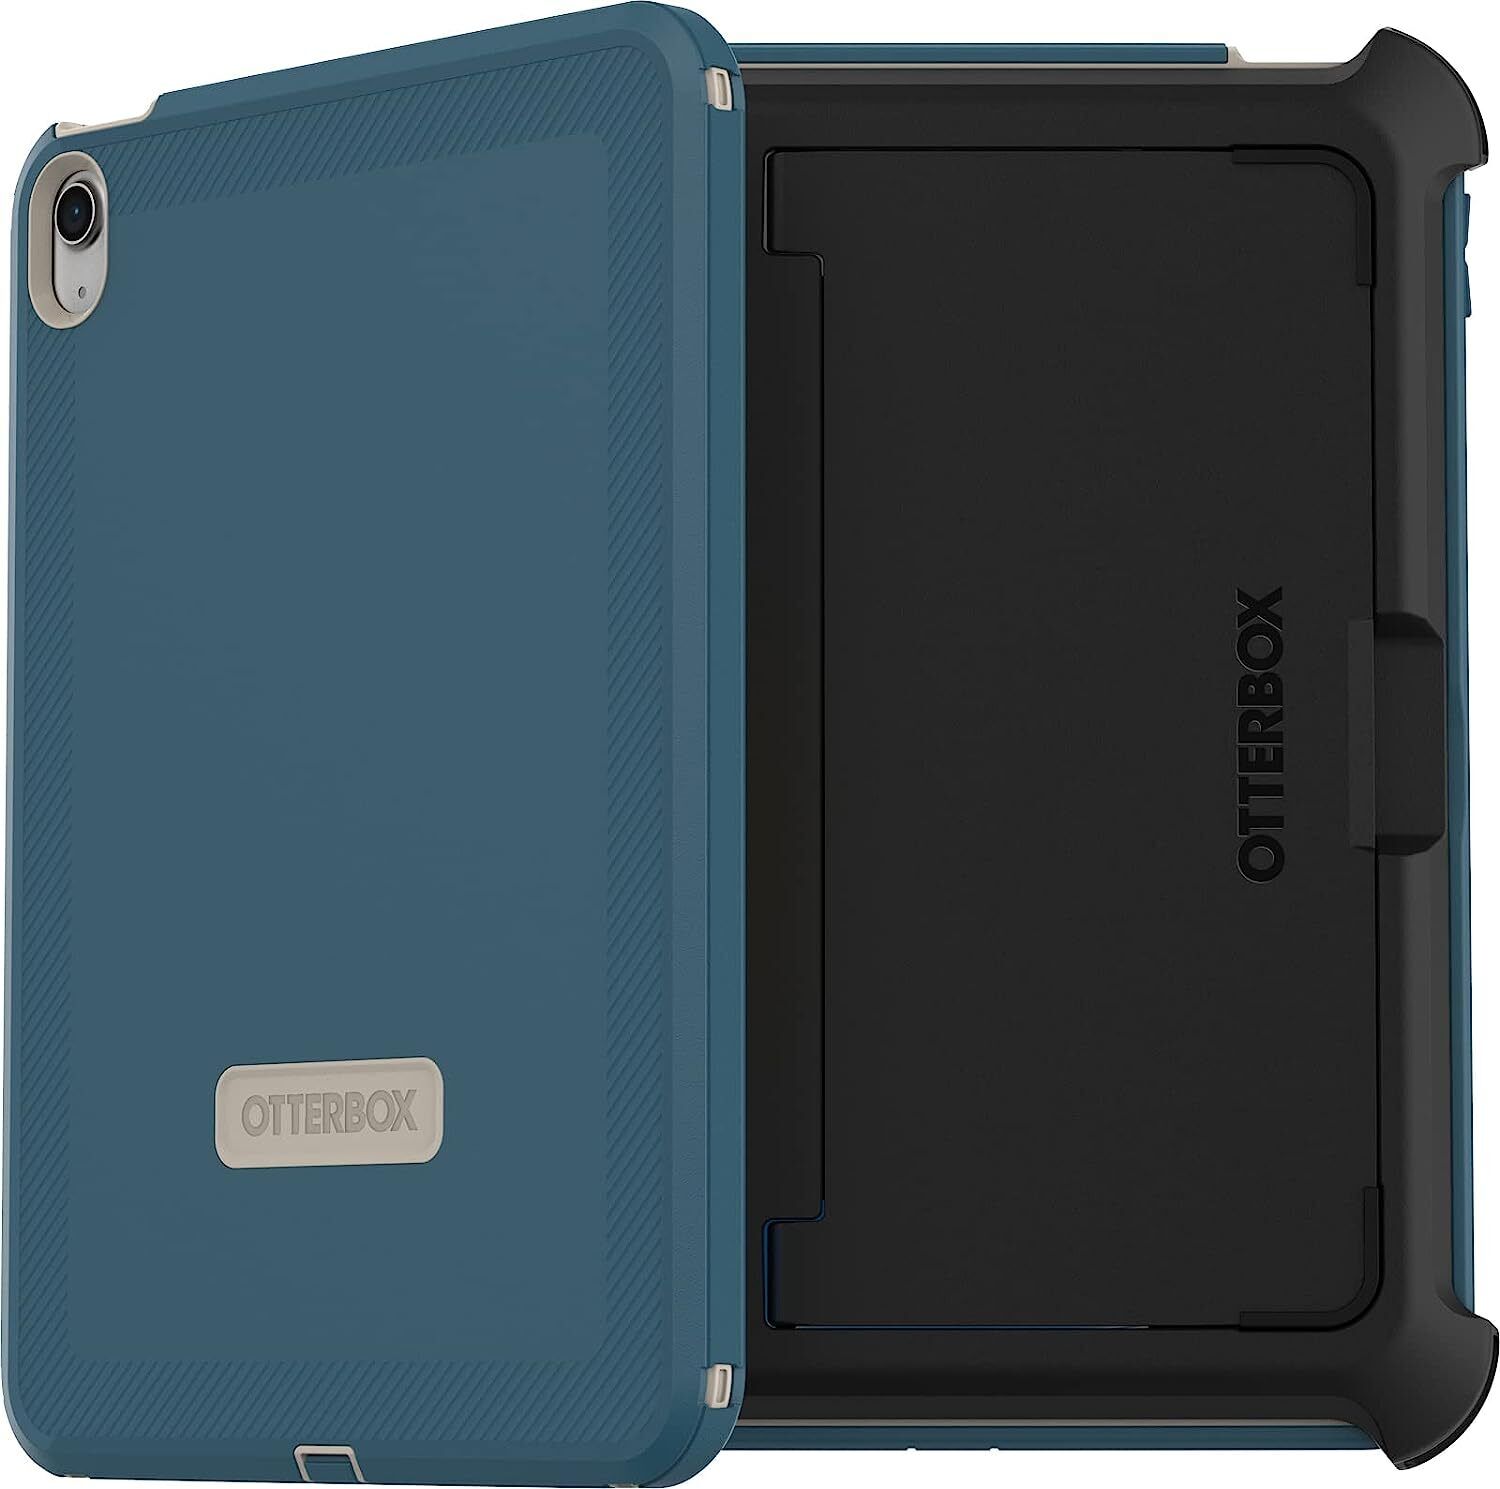 OtterBox Defender Series Case for iPad 10th Gen (Only)